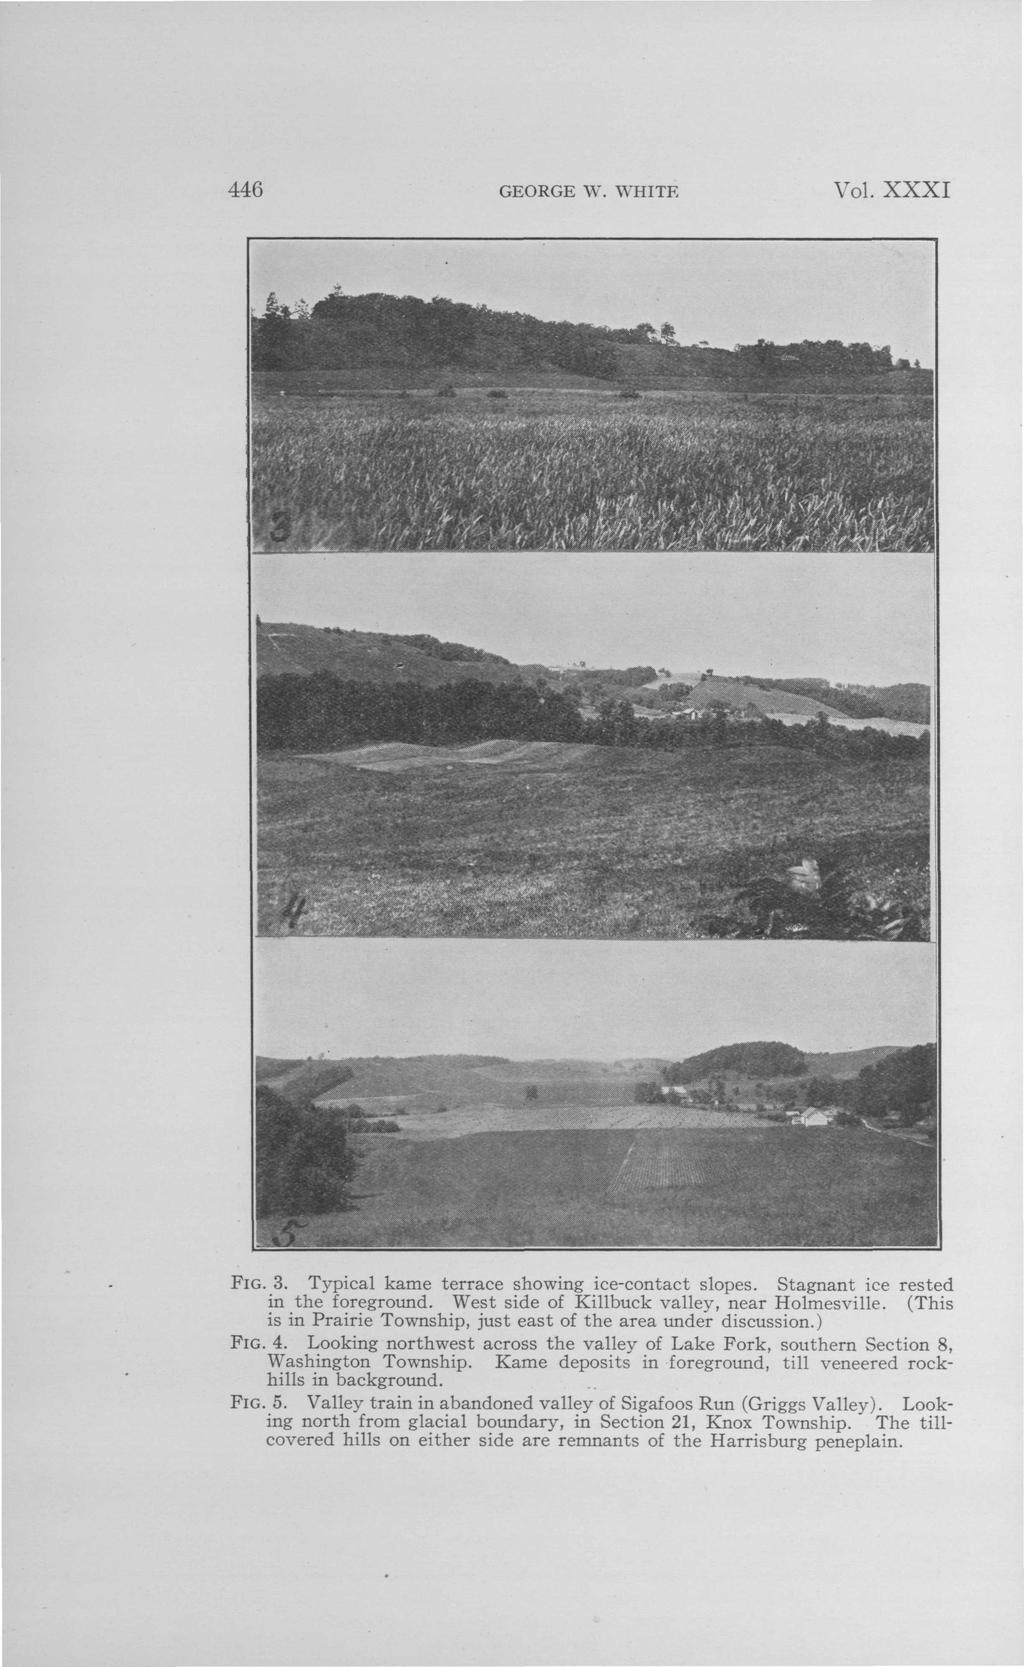 446 GEORGE W. WHITE Vol. XXXI FIG. 3. Typical kame terrace showing ice-contact slopes. Stagnant ice rested in the foreground. West side of Killbuck valley, near Holmesville.